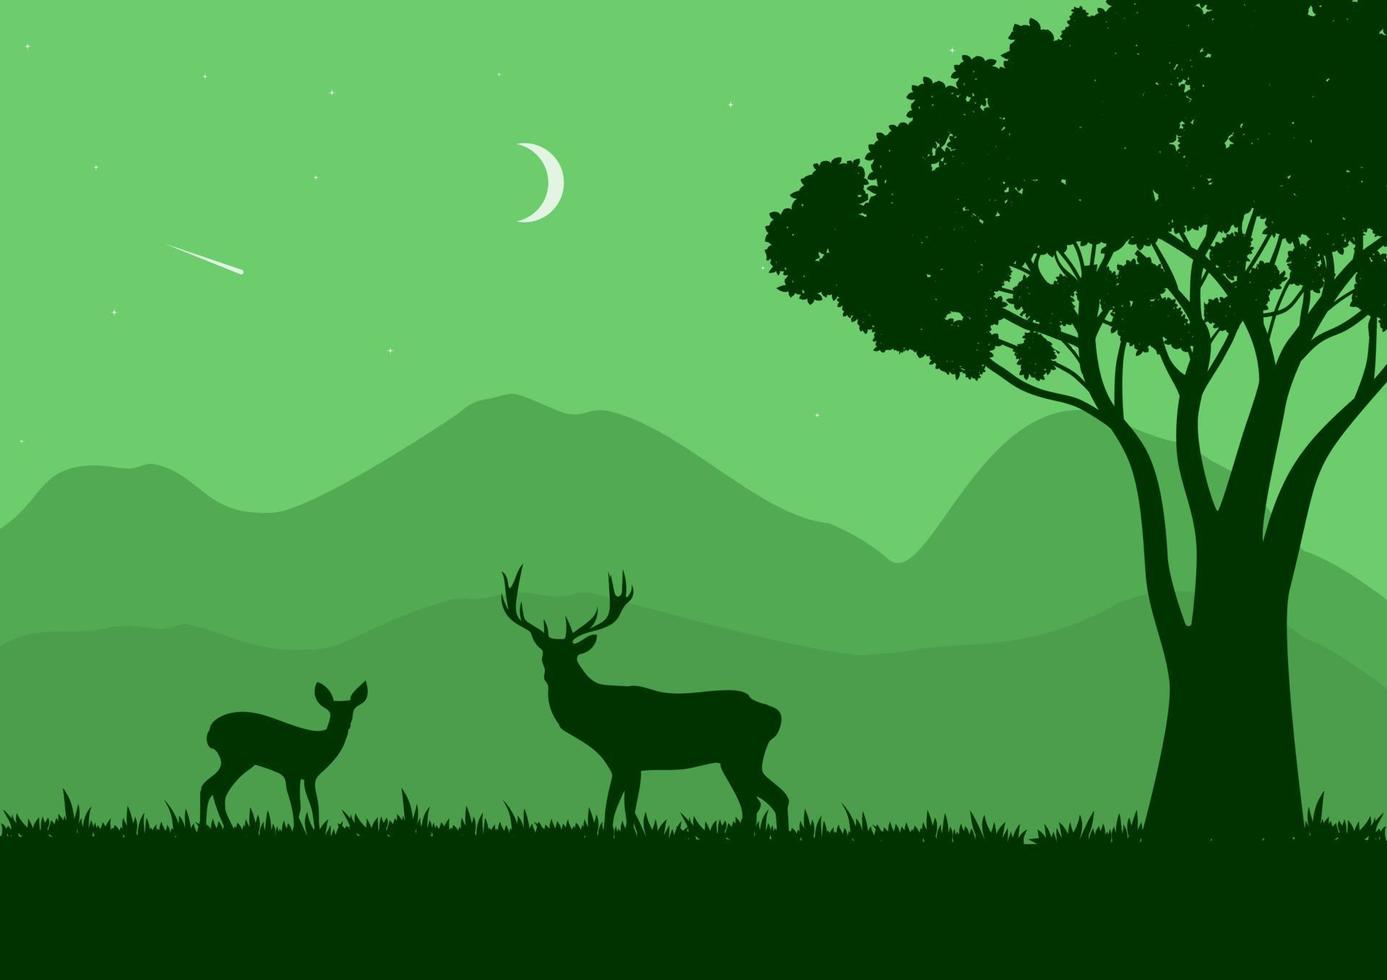 wildlife landscape vector illustration with a green silhouette